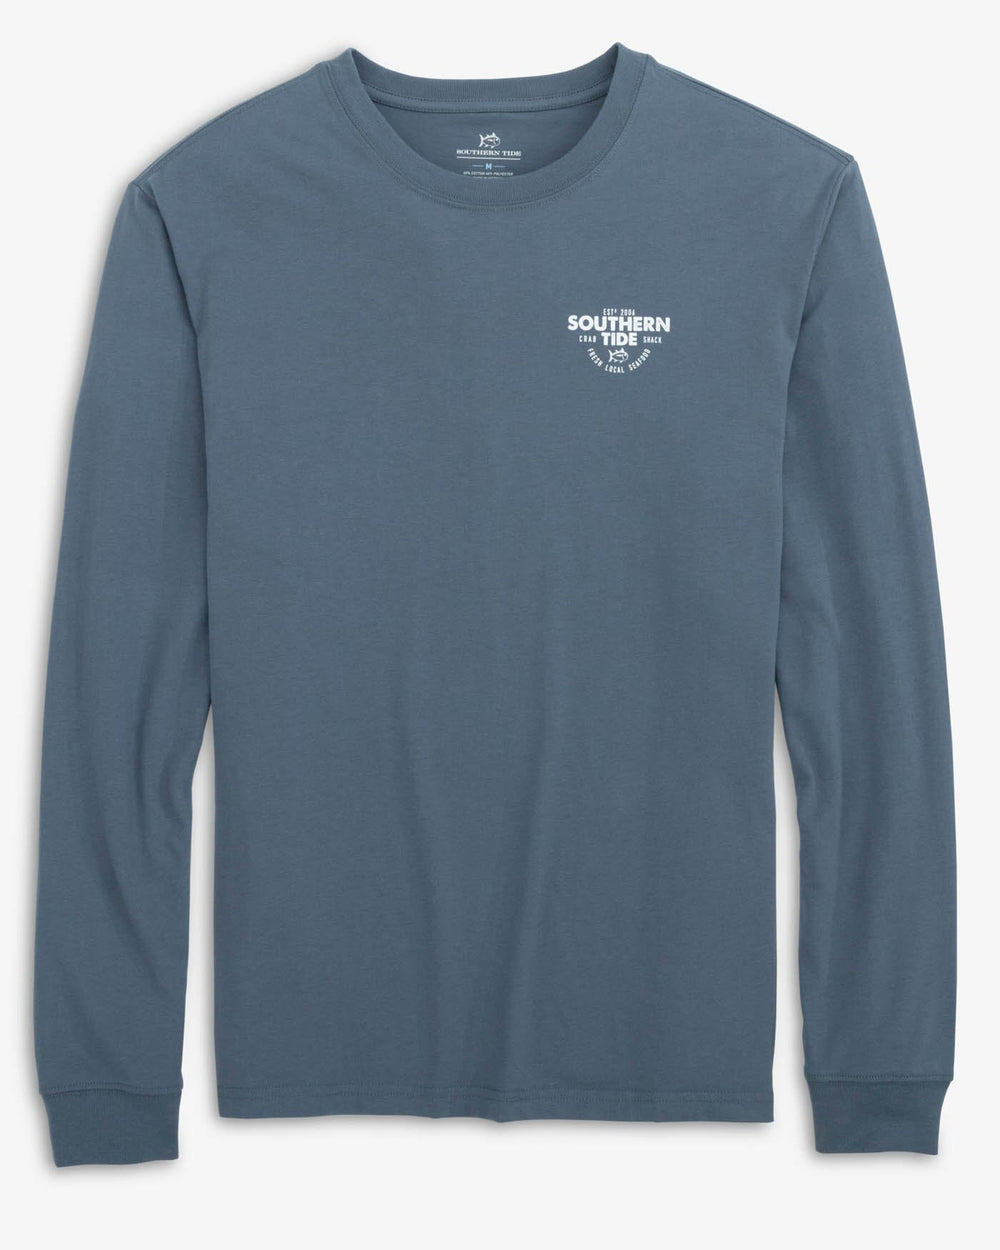 The front view of the Southern Tide Fresh Local Seafood Long Sleeve T-Shirt by Southern Tide - Blue Haze